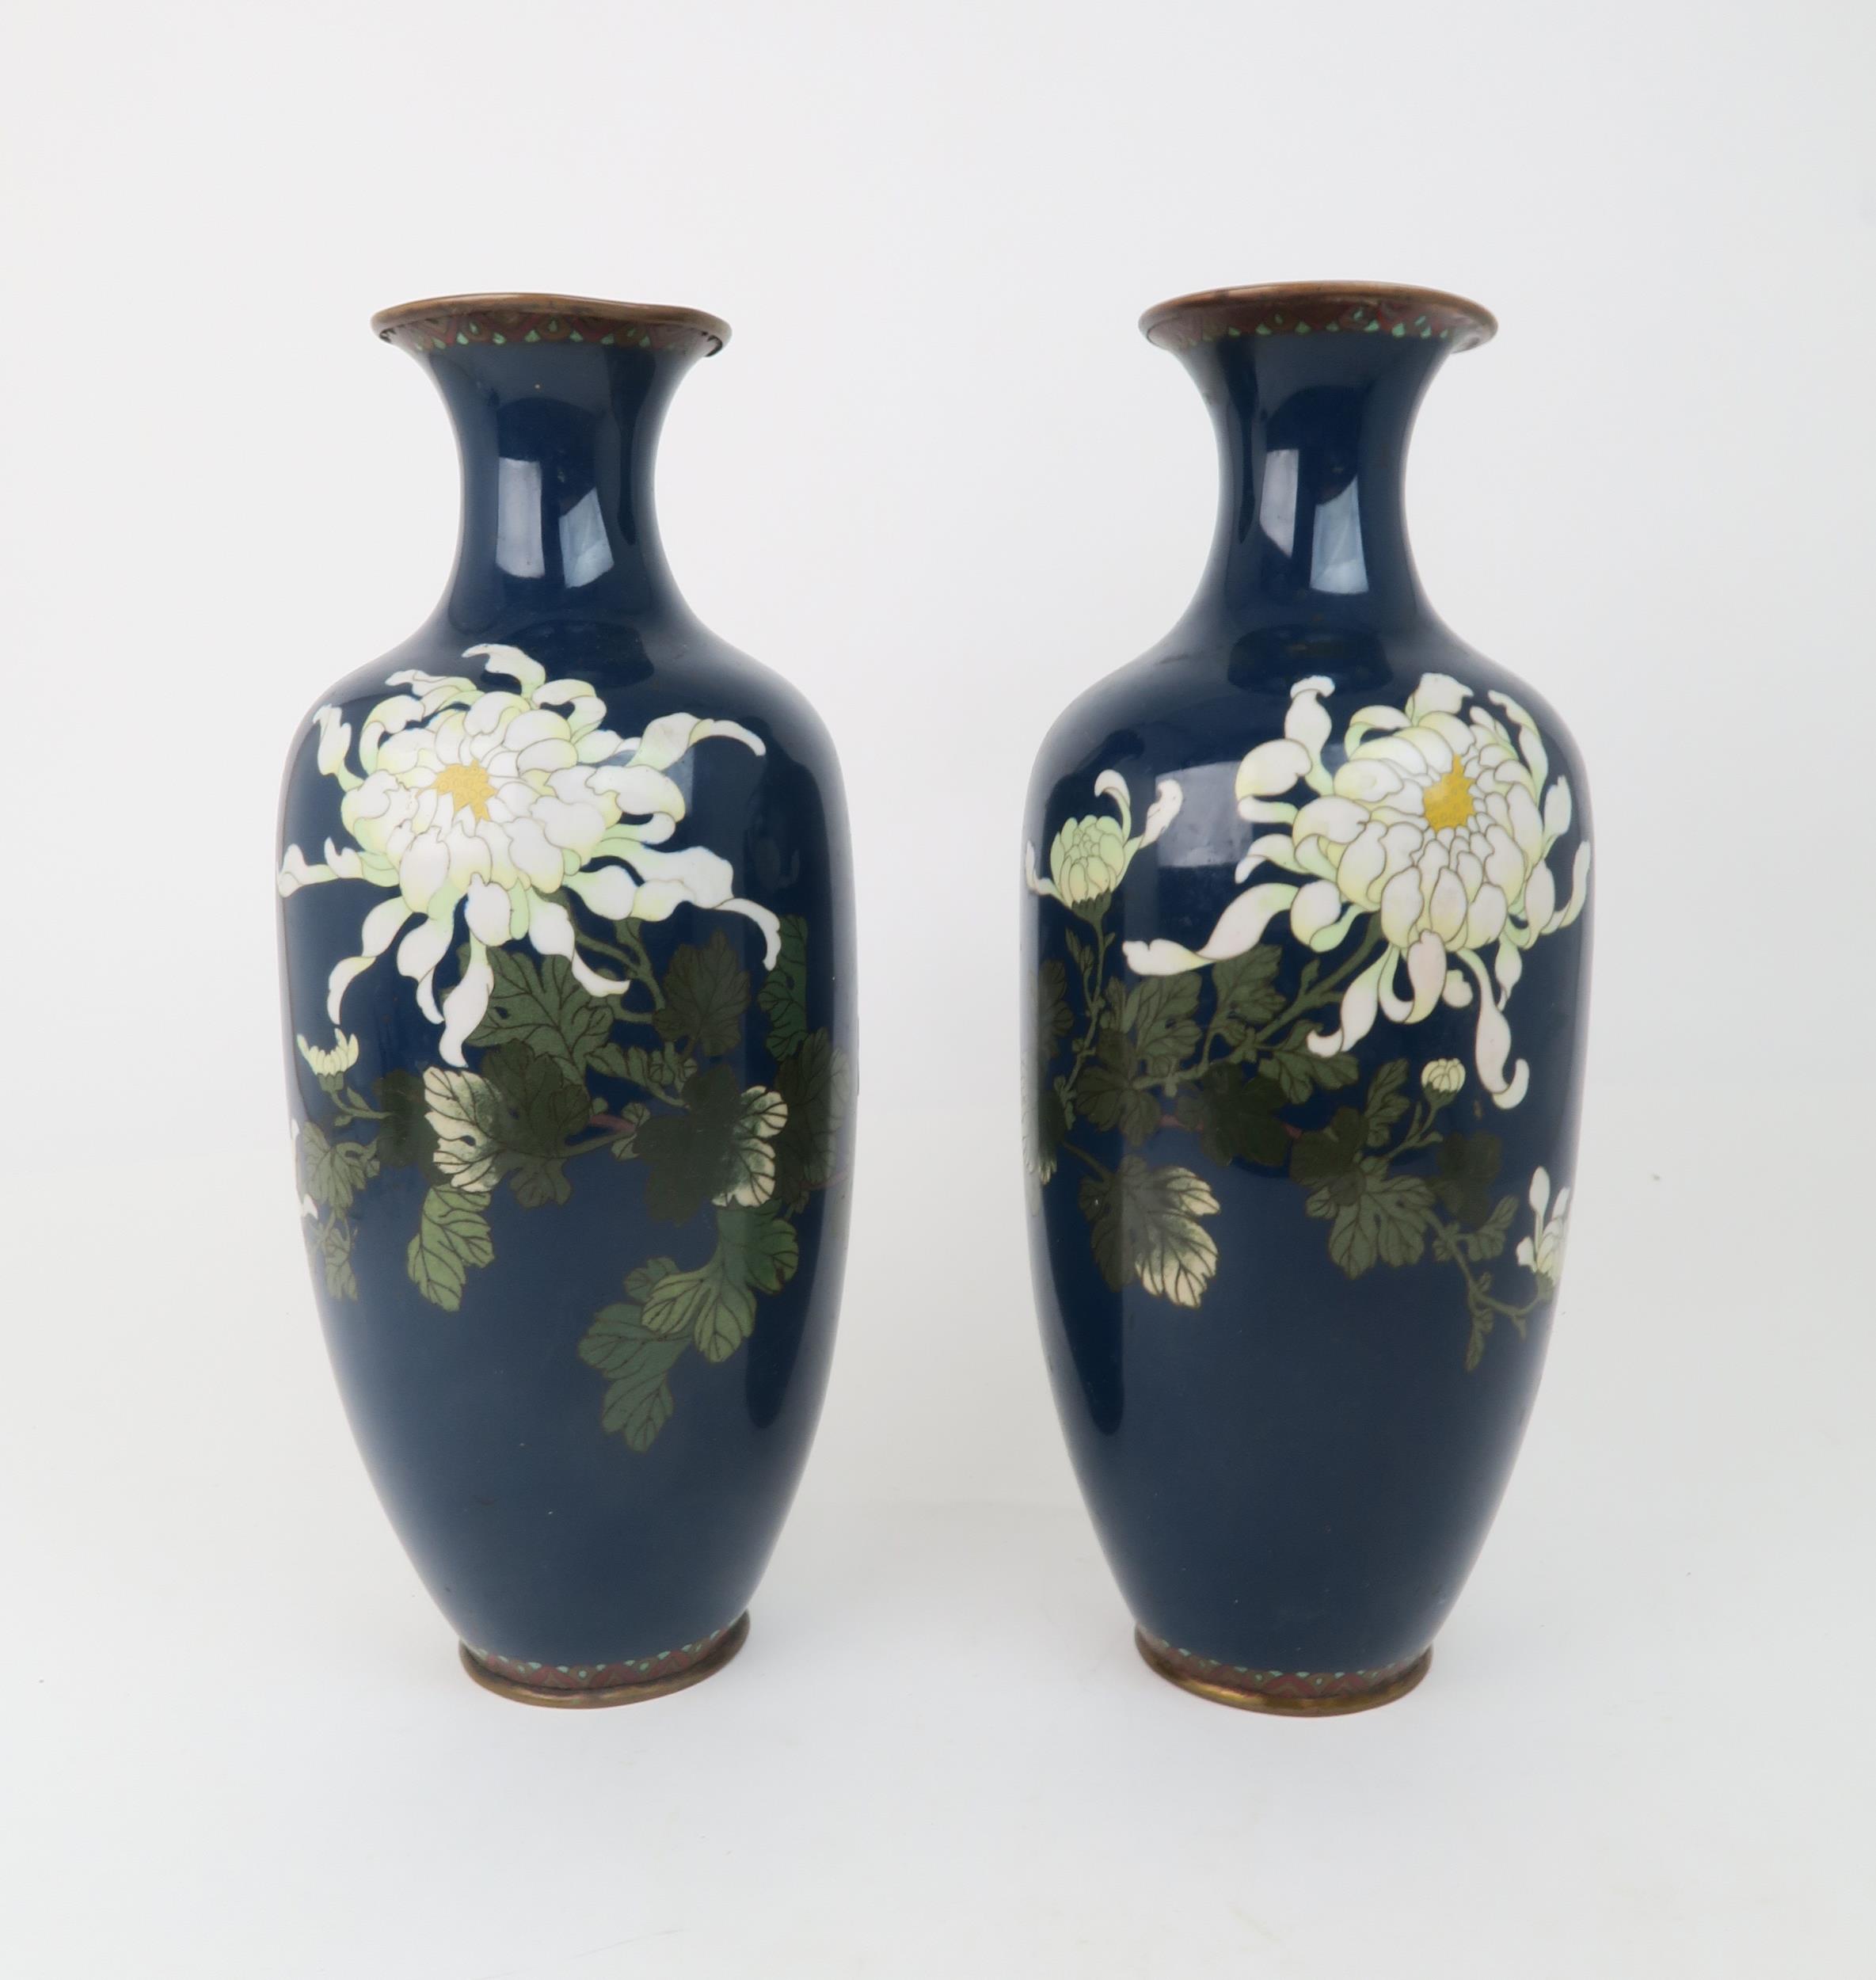 A PAIR OF JAPANESE CLOISONNE VASES Decorated with white peonies and foliage, 37cm high Condition